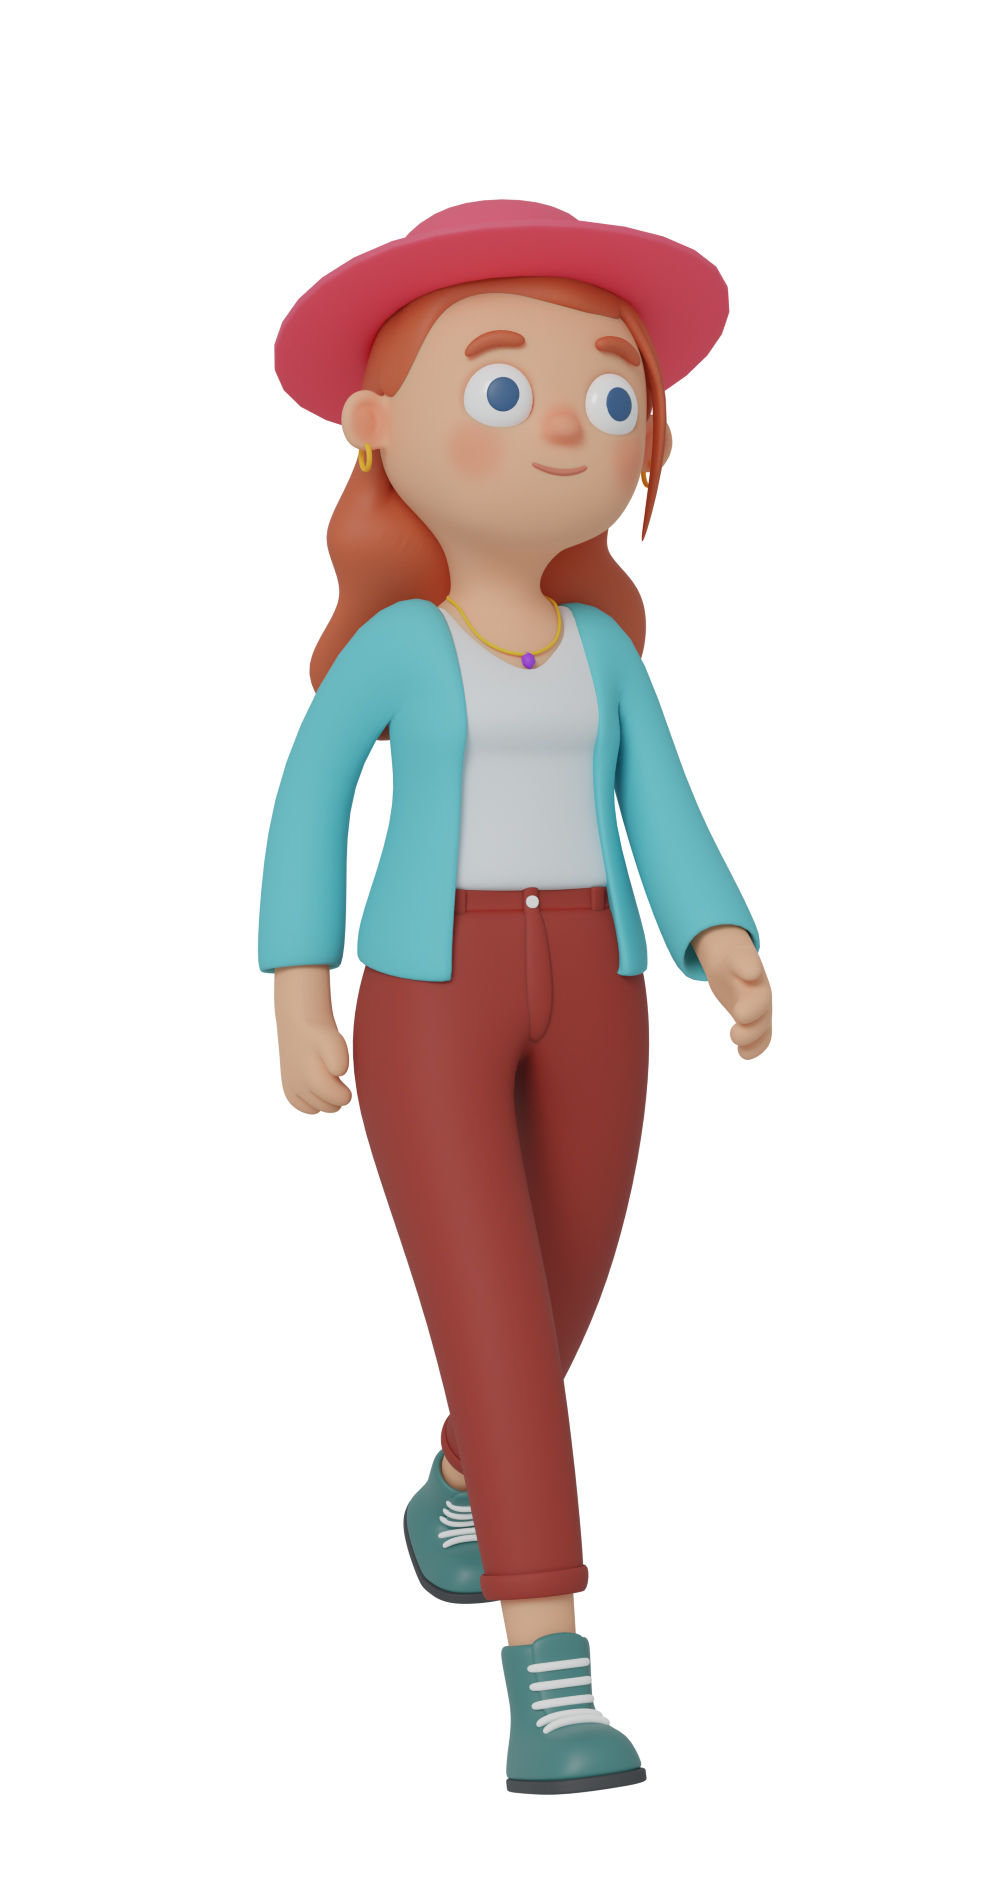 larger preview of a 3d character design of a girl walking